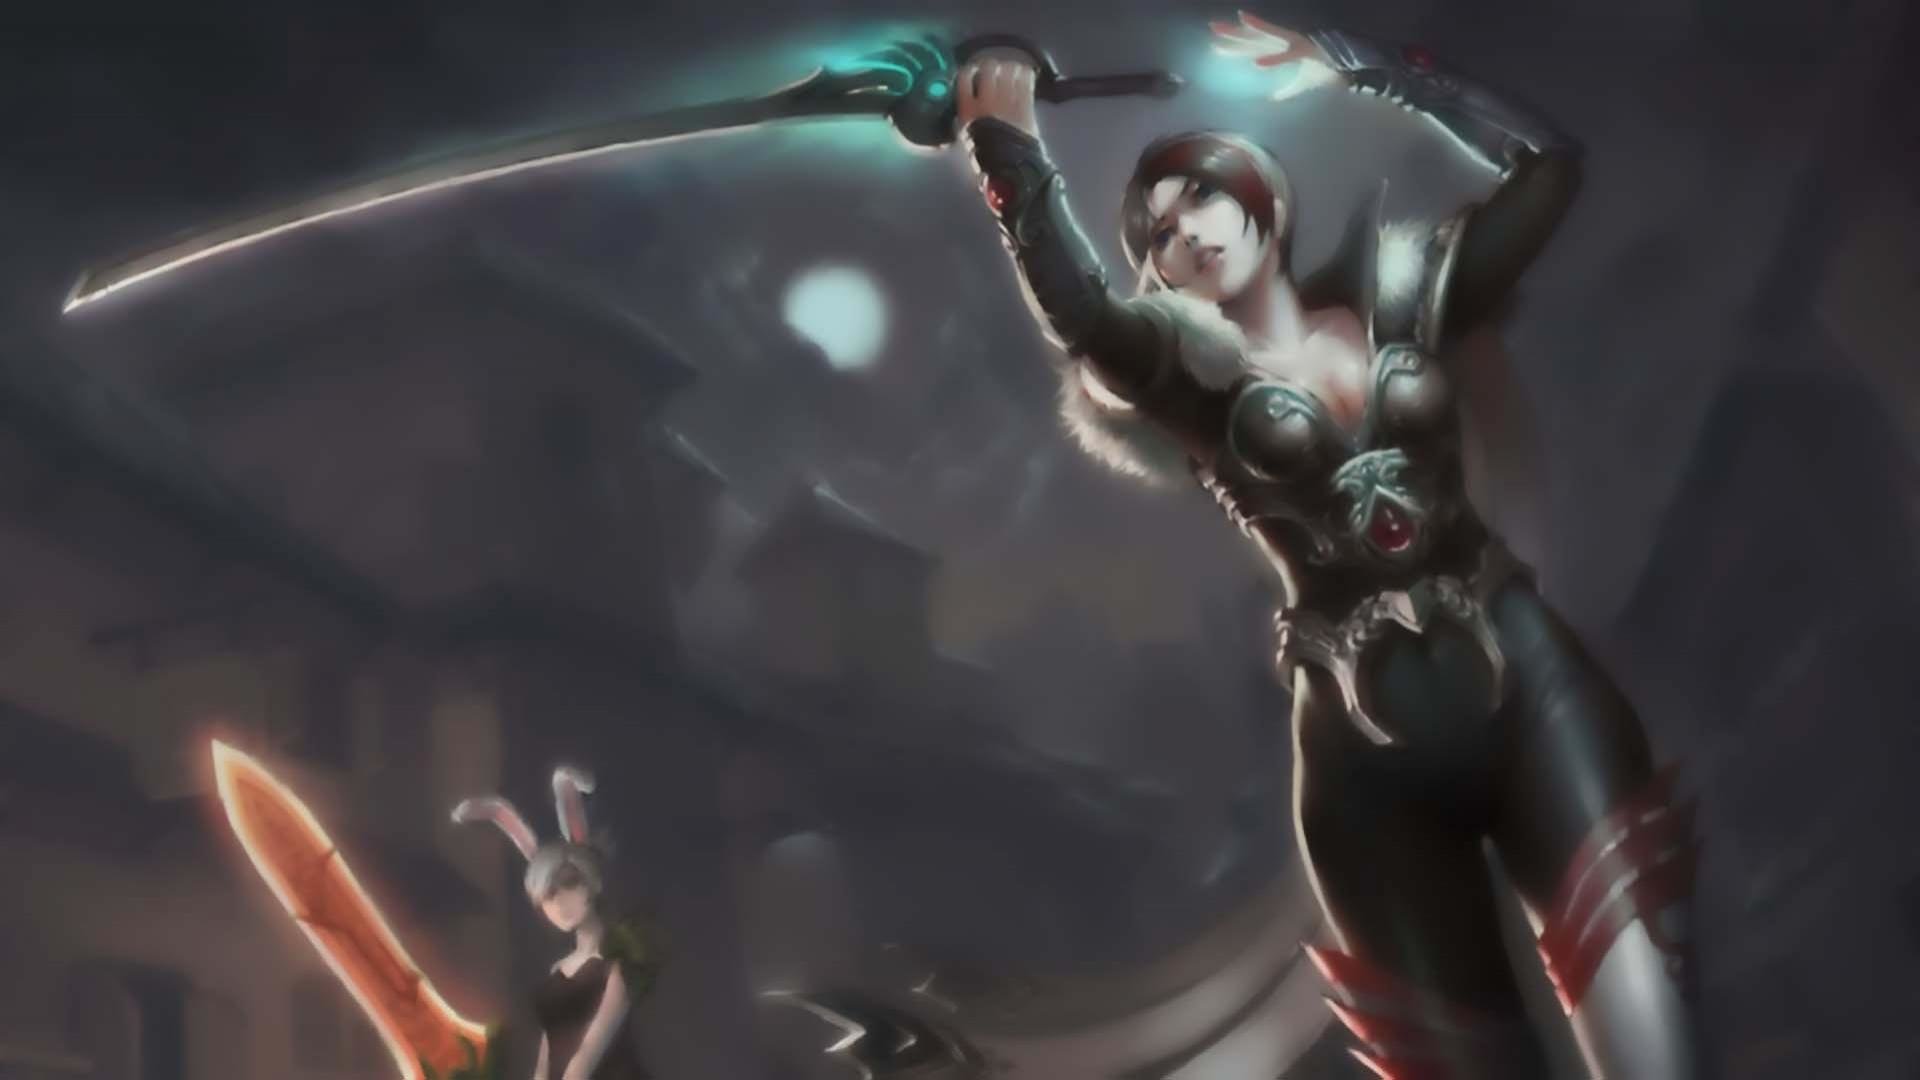 Download full hd 1080p Fiora (League Of Legends) PC wallpaper ID:172401 for free